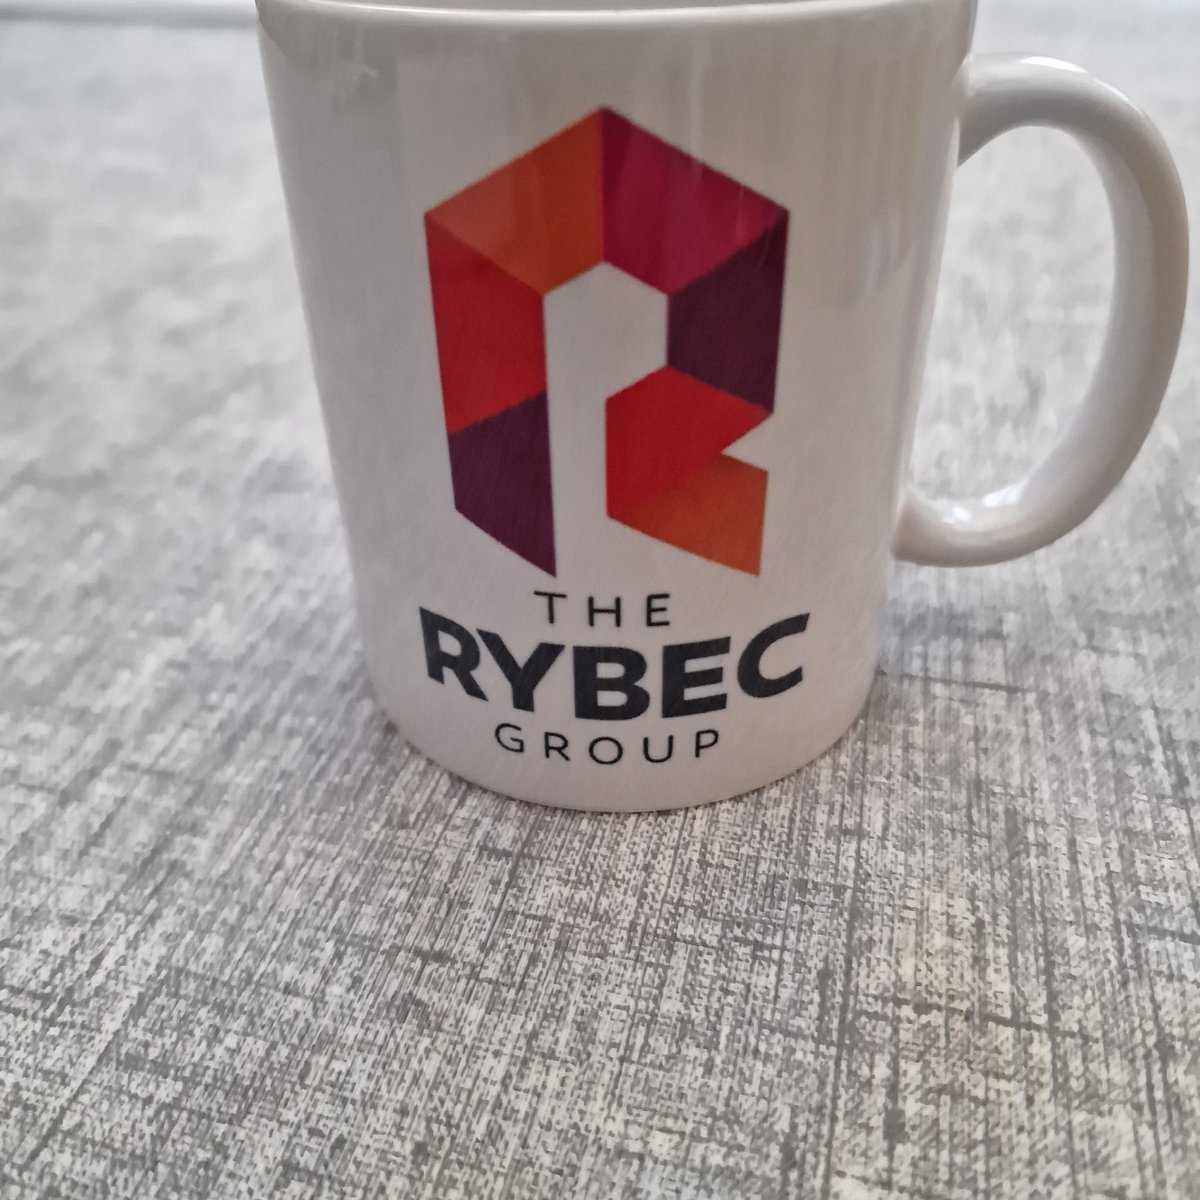 Monday mornings are better with a new office, new coffee cups, and new connections! 
That's why we're inviting you to connect with us over a coffee at our new office to discuss your Cyber Security needs.

Email us contact@rybec.co.uk to schedule a time to connect.
#therybecgroup